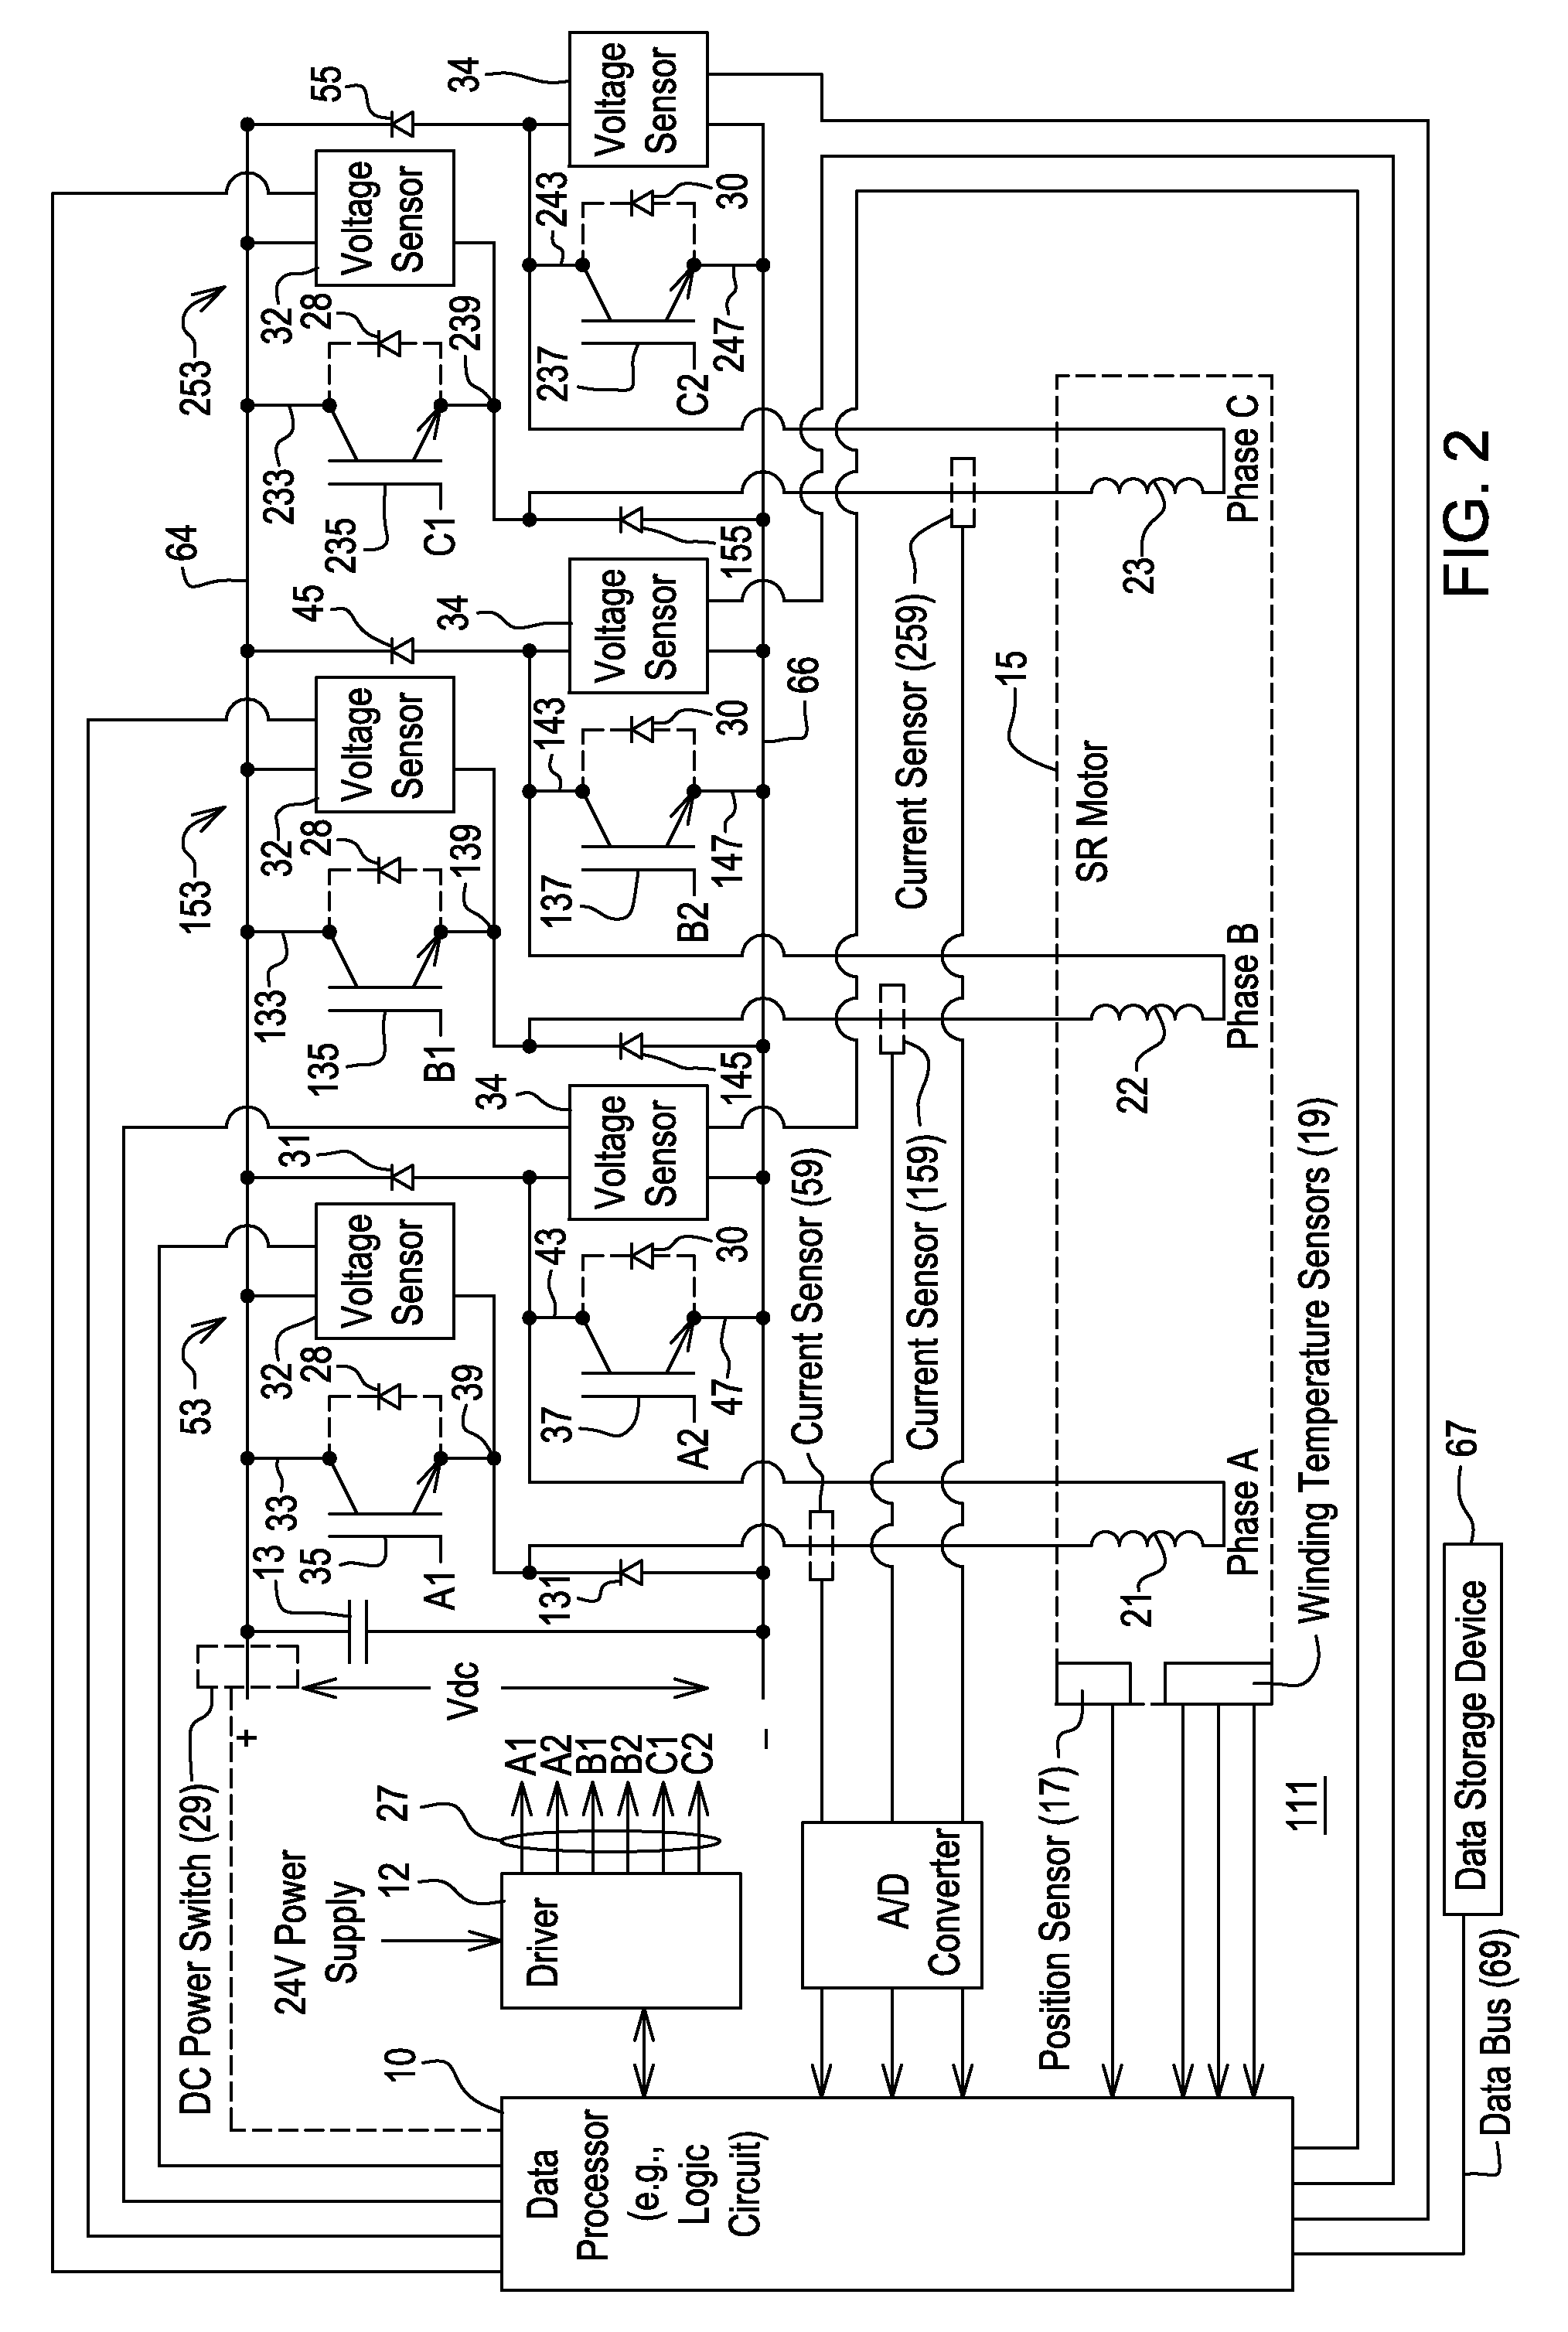 Method and controller for an electric motor with fault detection